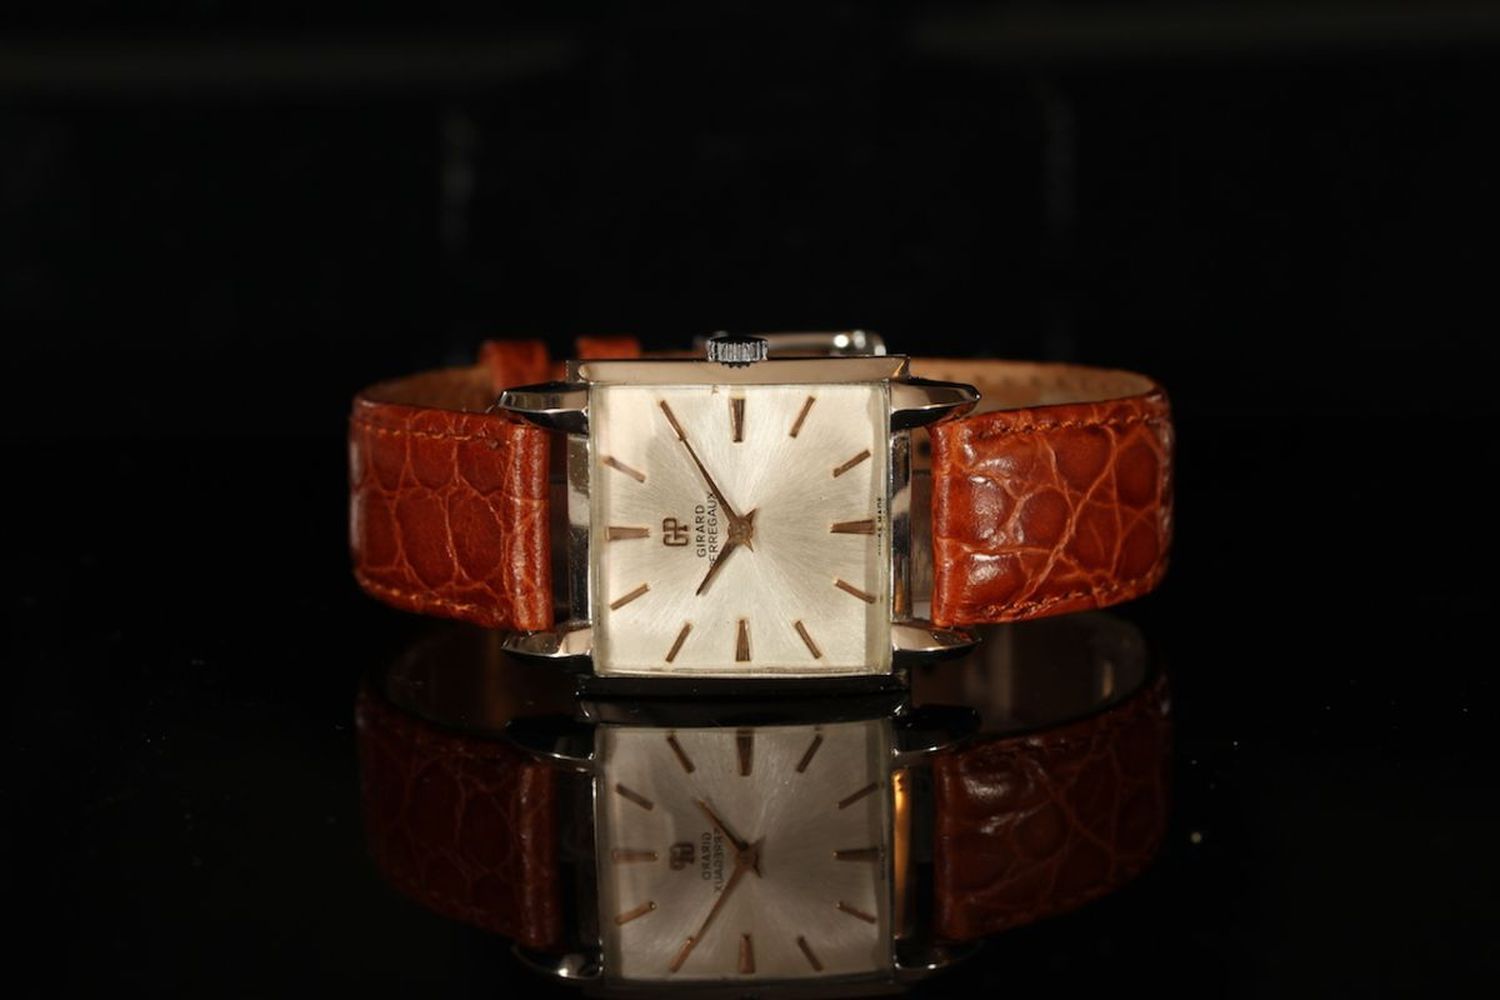 GENTLEMENS GIRARD PERREGAUX WRISTWATCH, square silver dial with bronze applied hour markers and